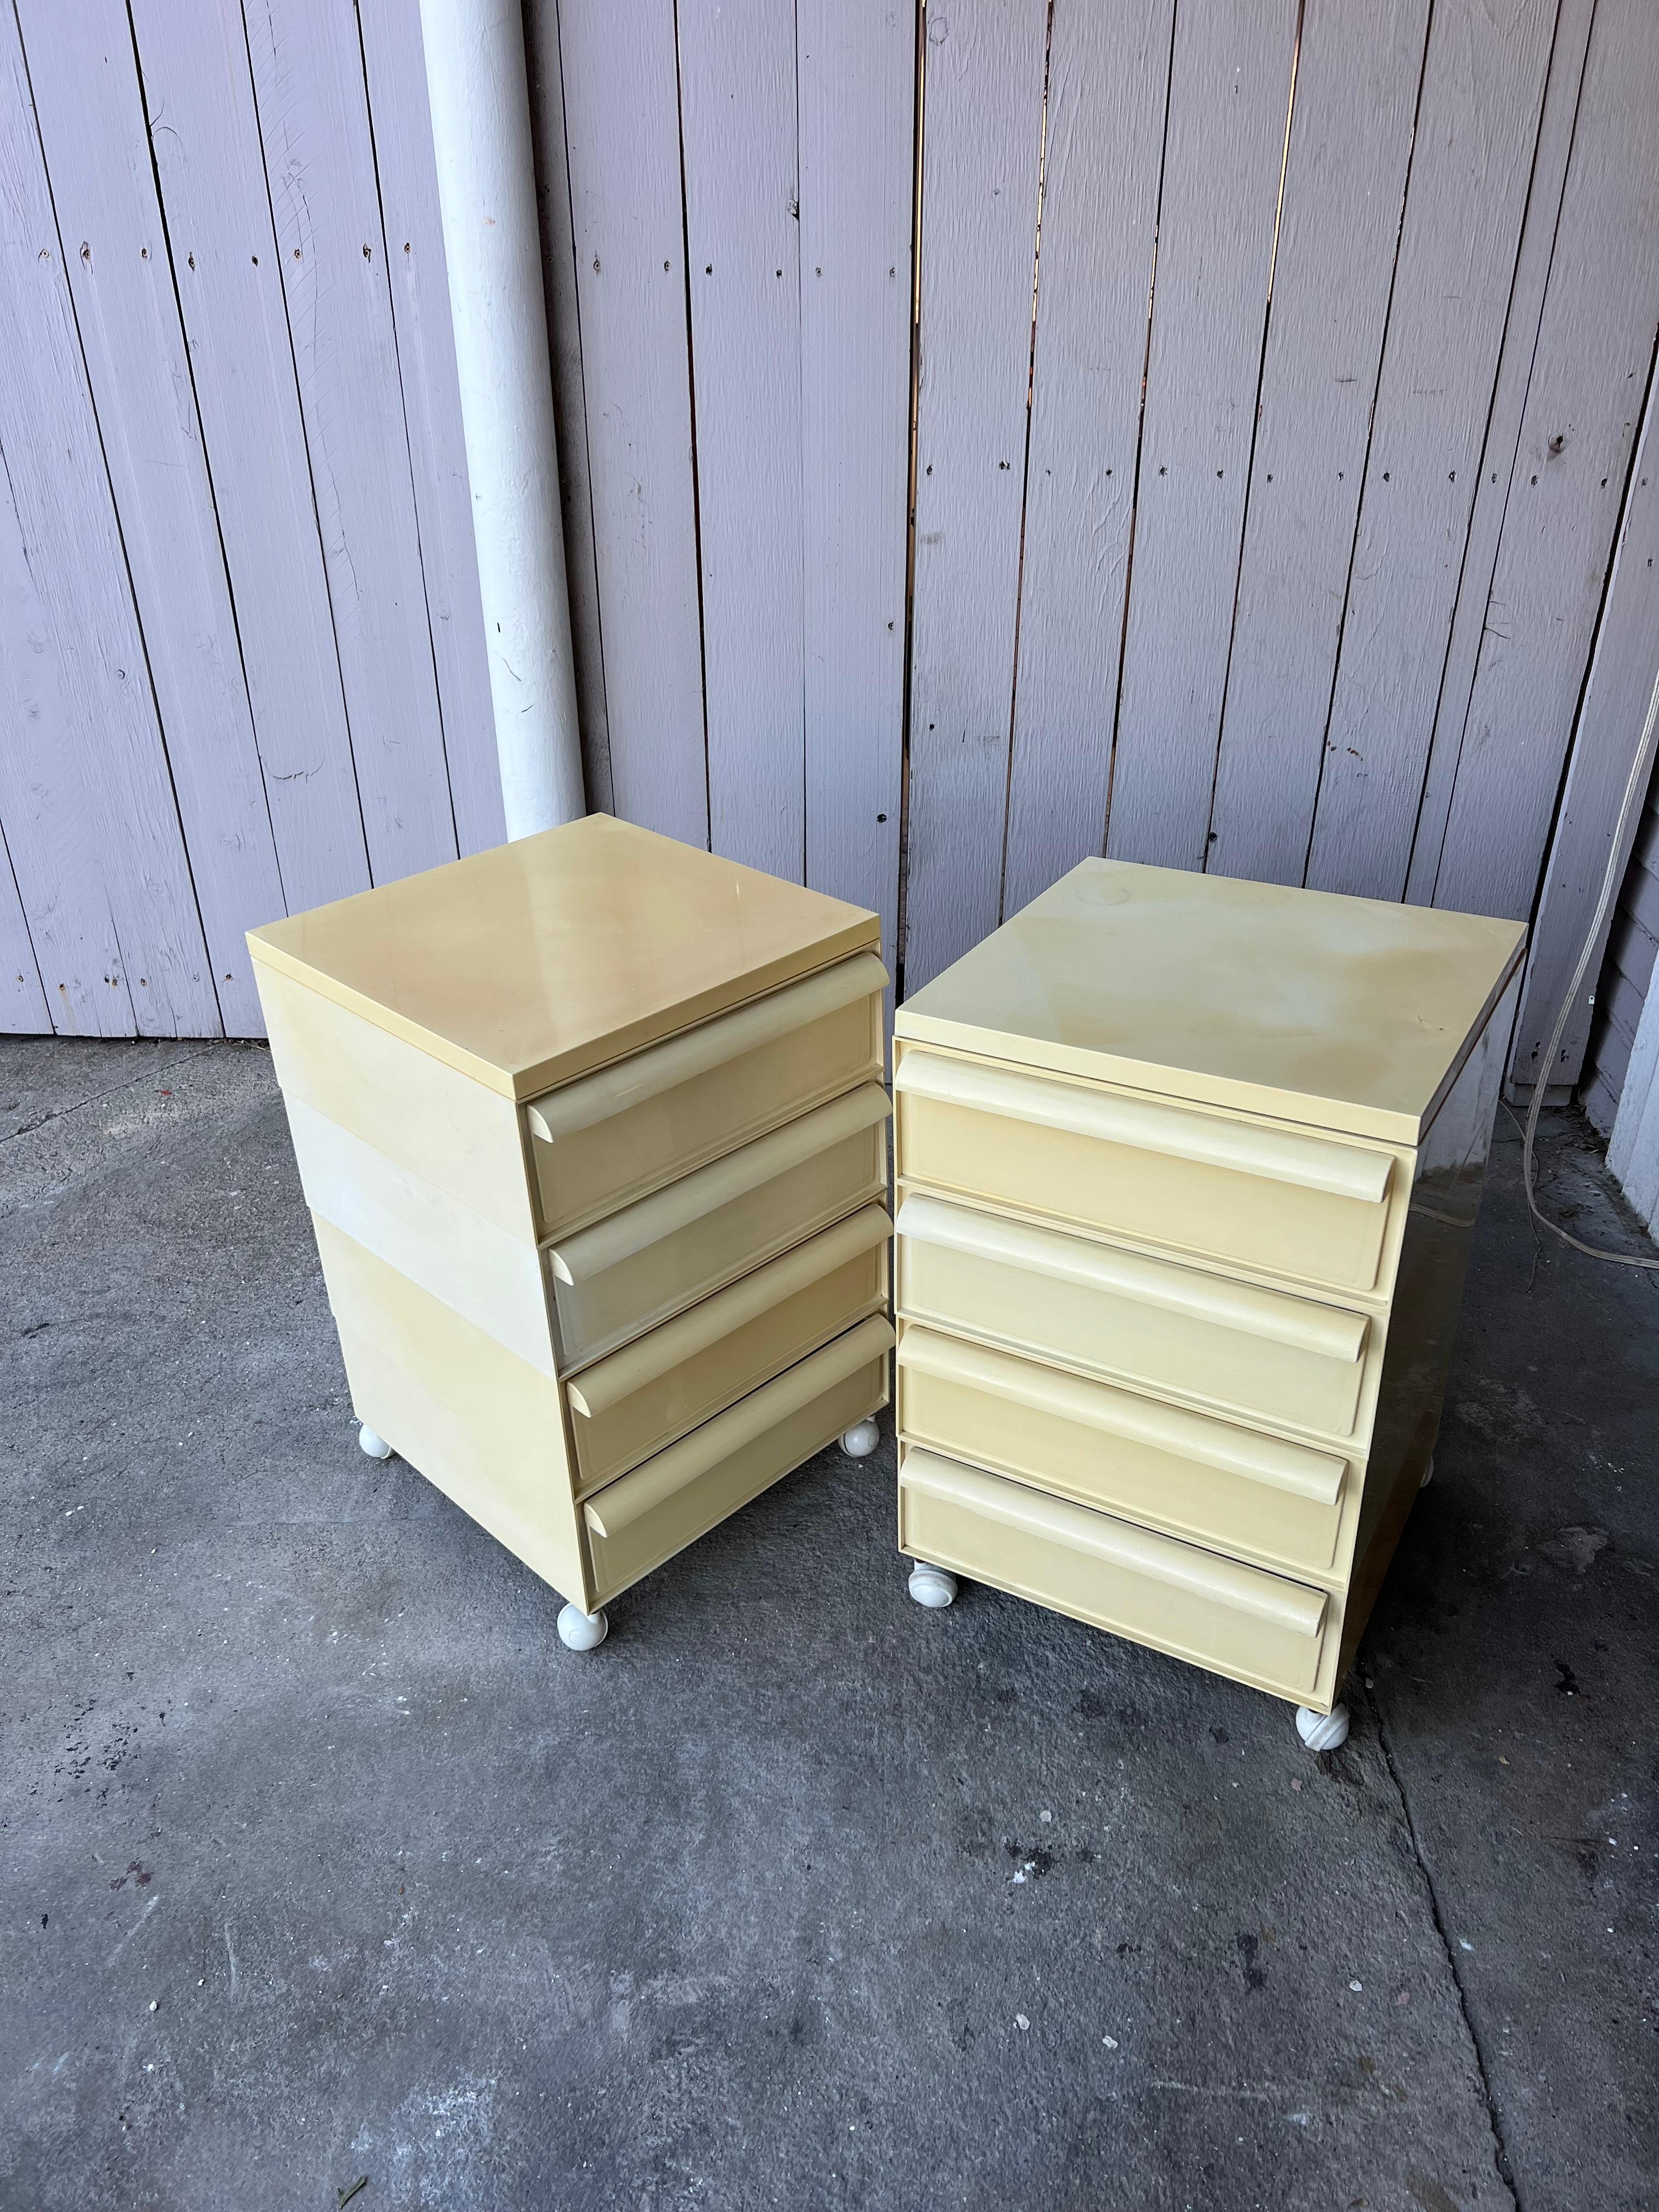 This listing includes four stacking drawers, one top, and four wheels. Two sets available.

 These drawers are from the 1970s and have some discoloration and wear that is consistant with age and use. Please see photos for details. They are 100%